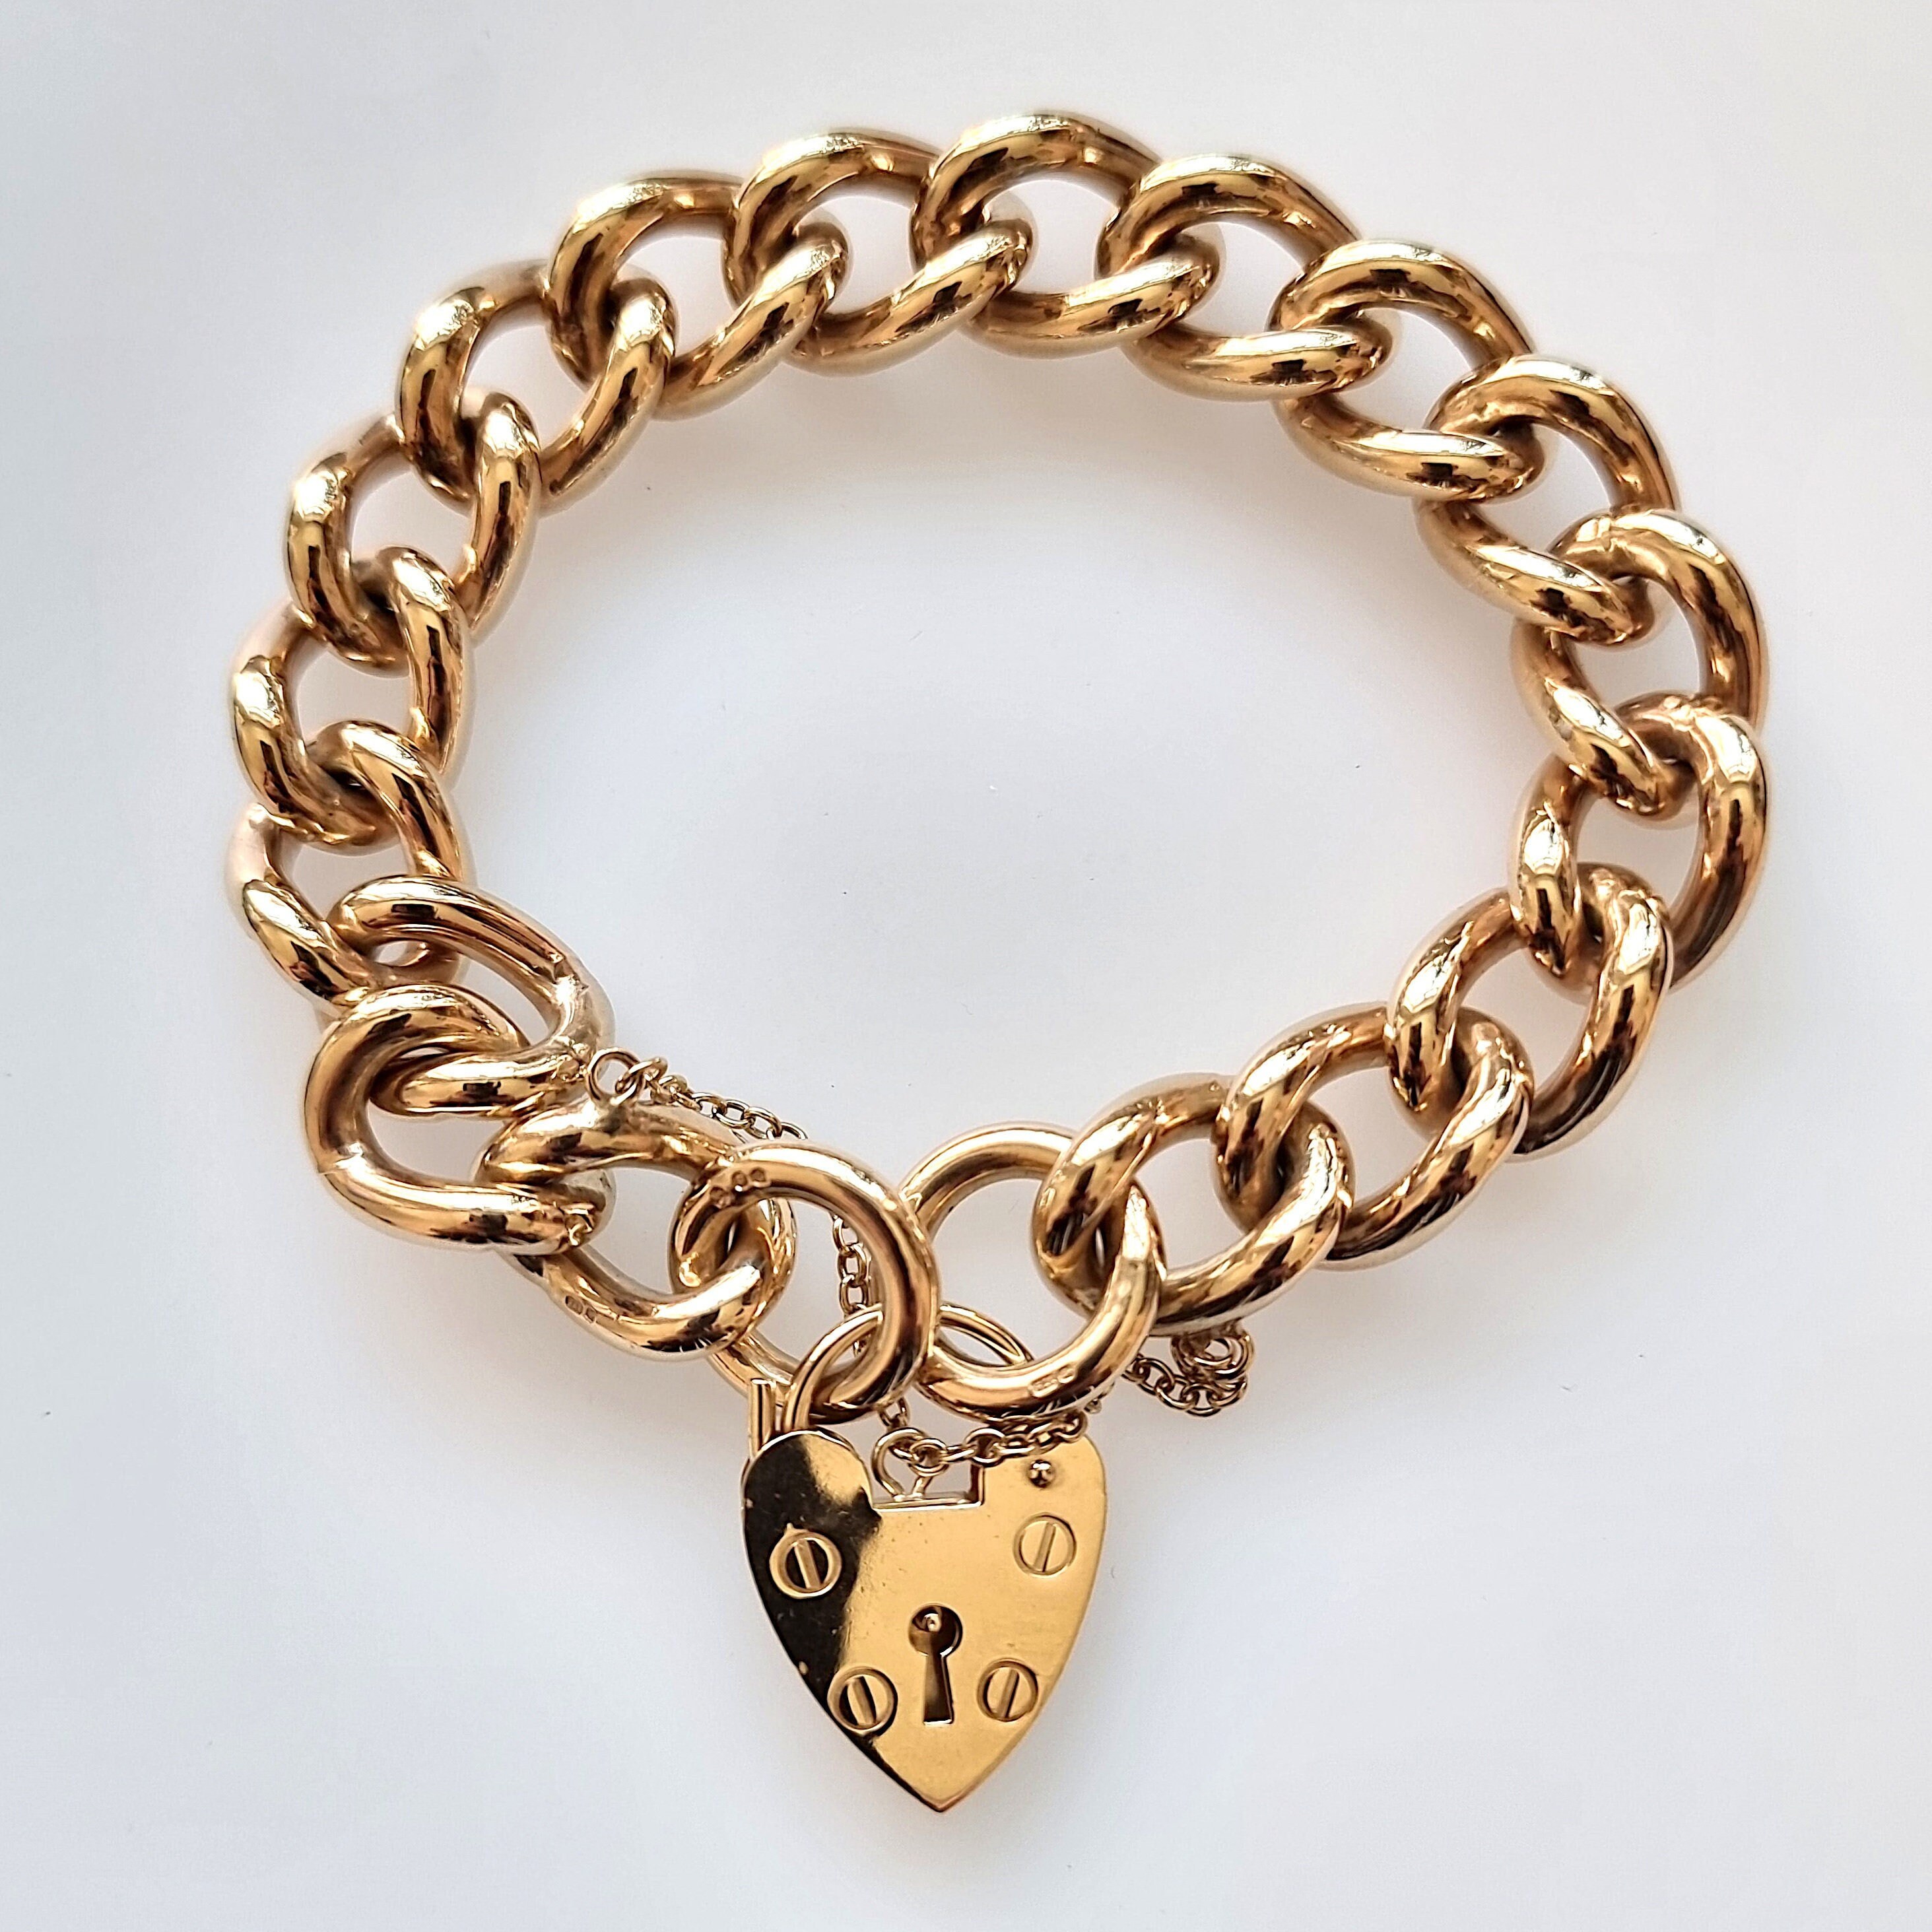 New 9ct Yellow Gold 8 inch Double Curb Bracelet